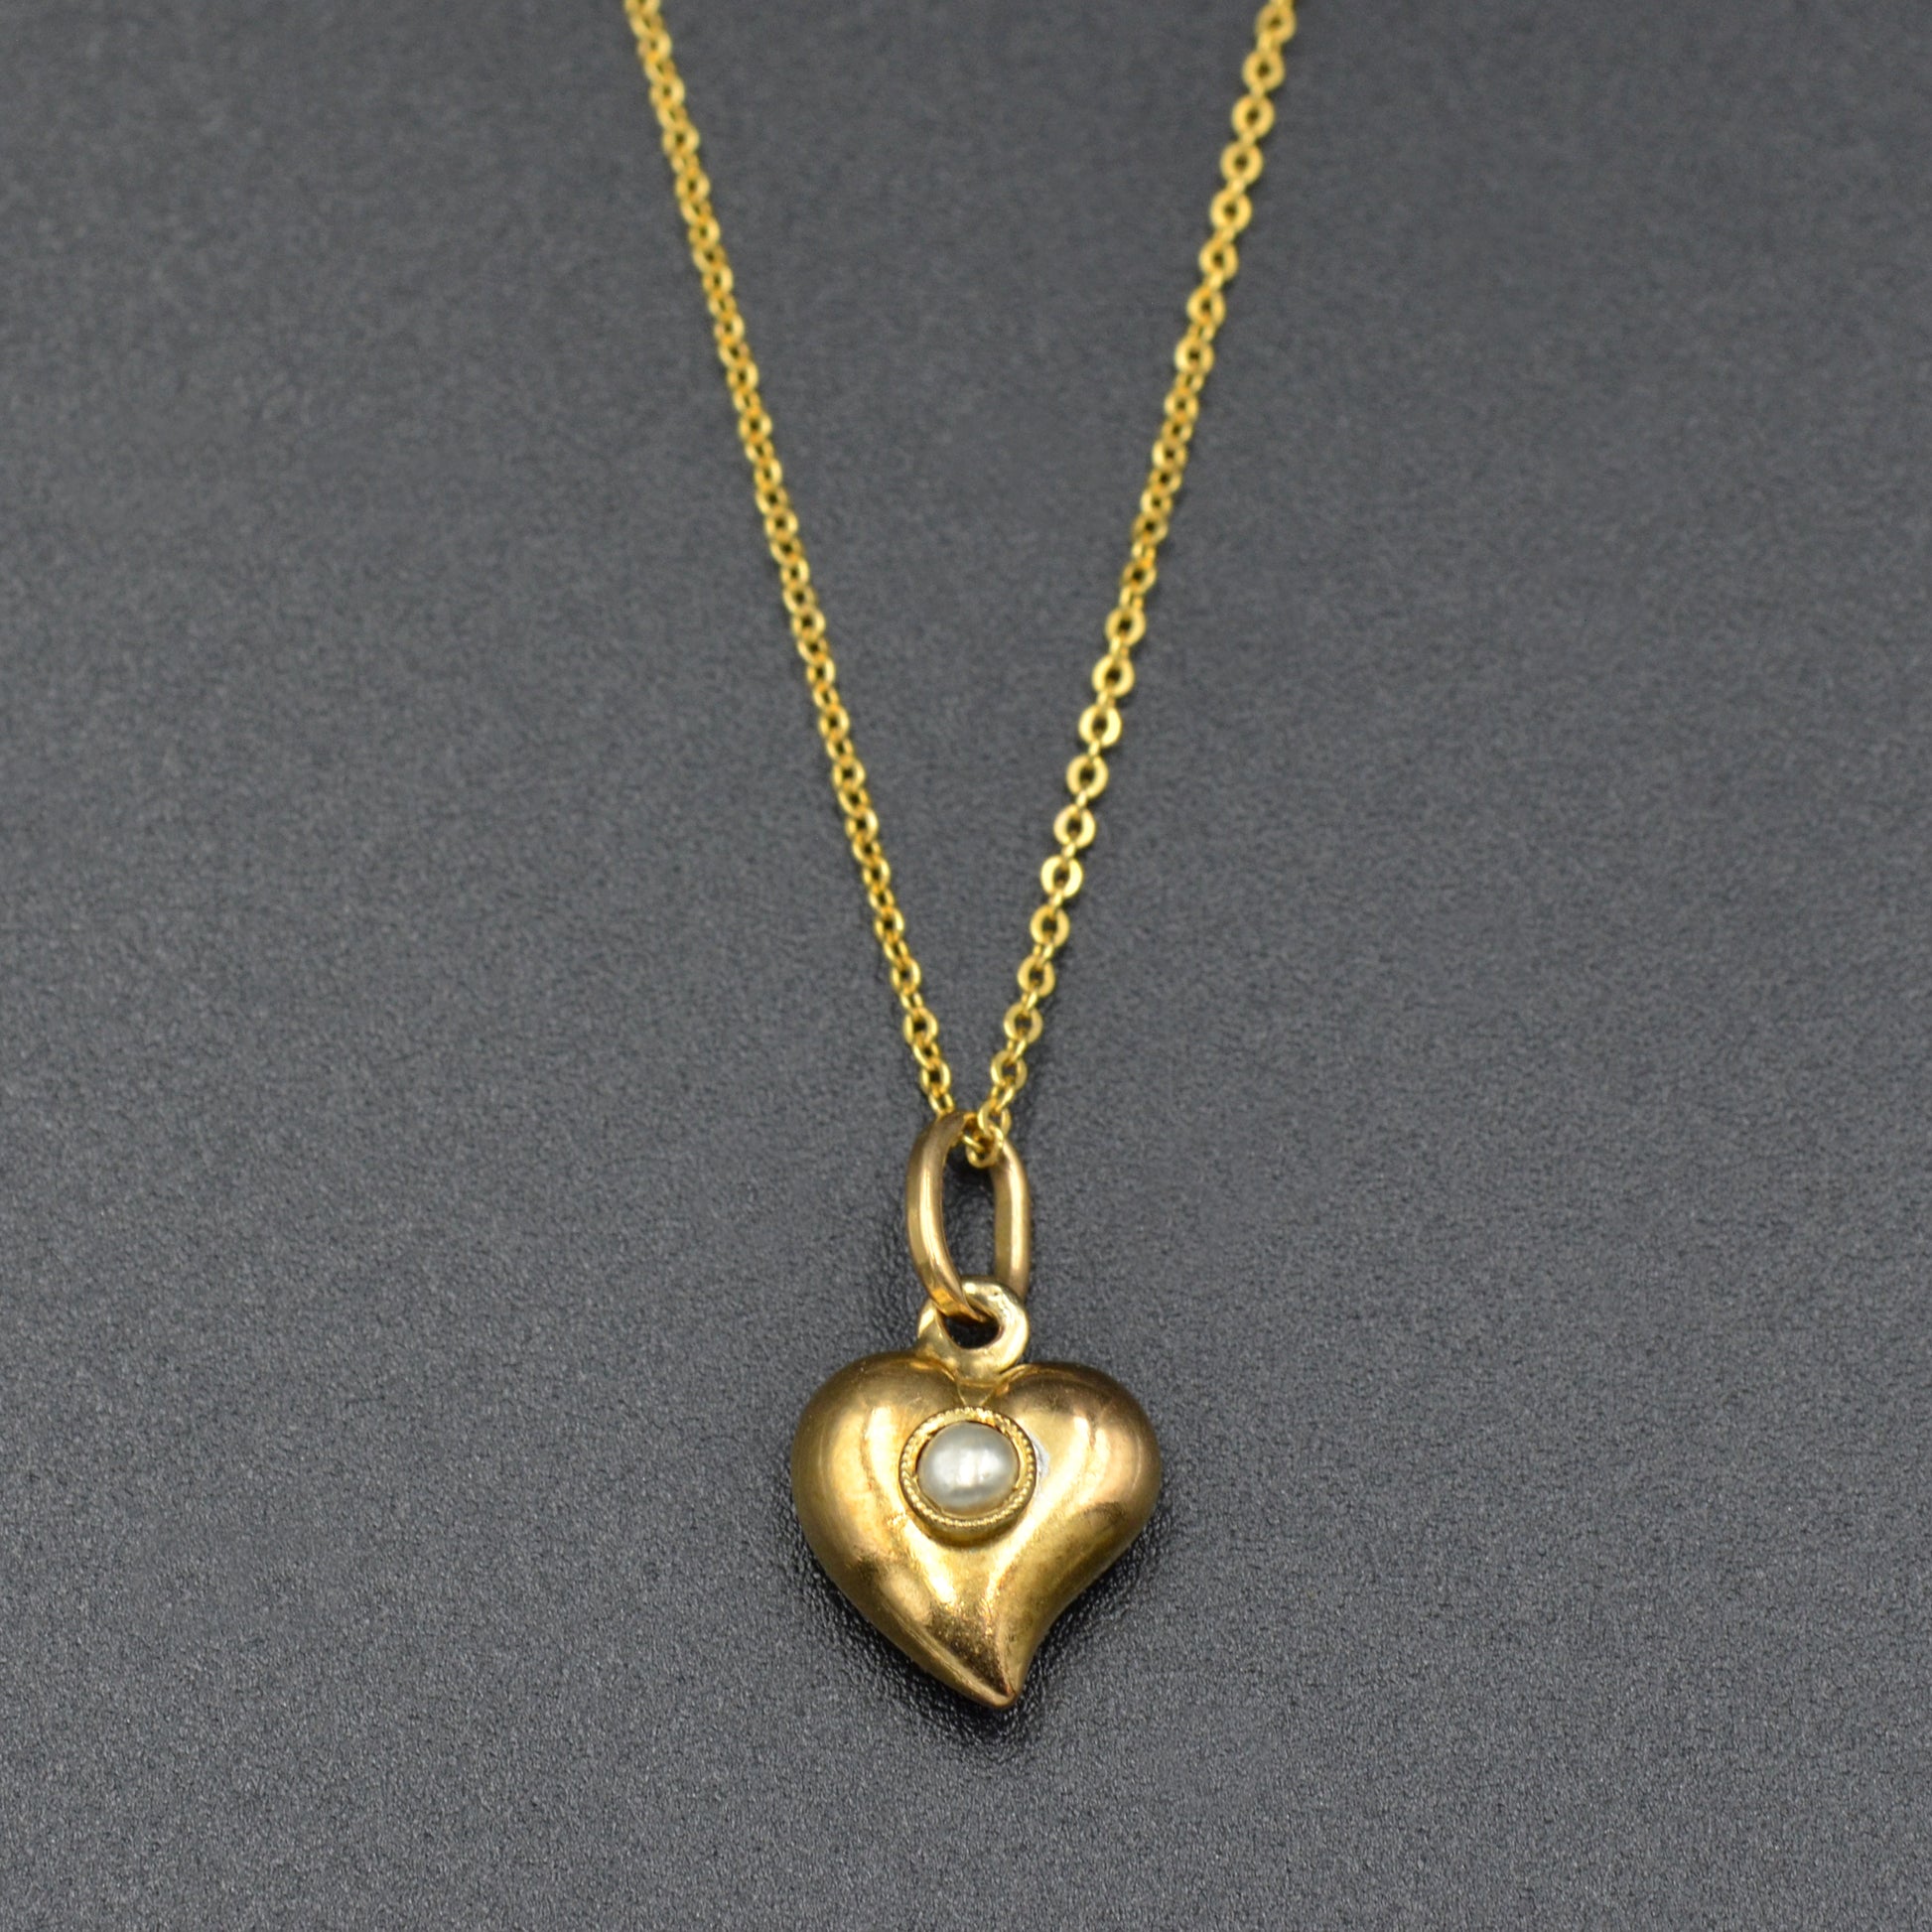 Antique Luckenbooth Witch's Heart 15k Gold and Pearl Necklace